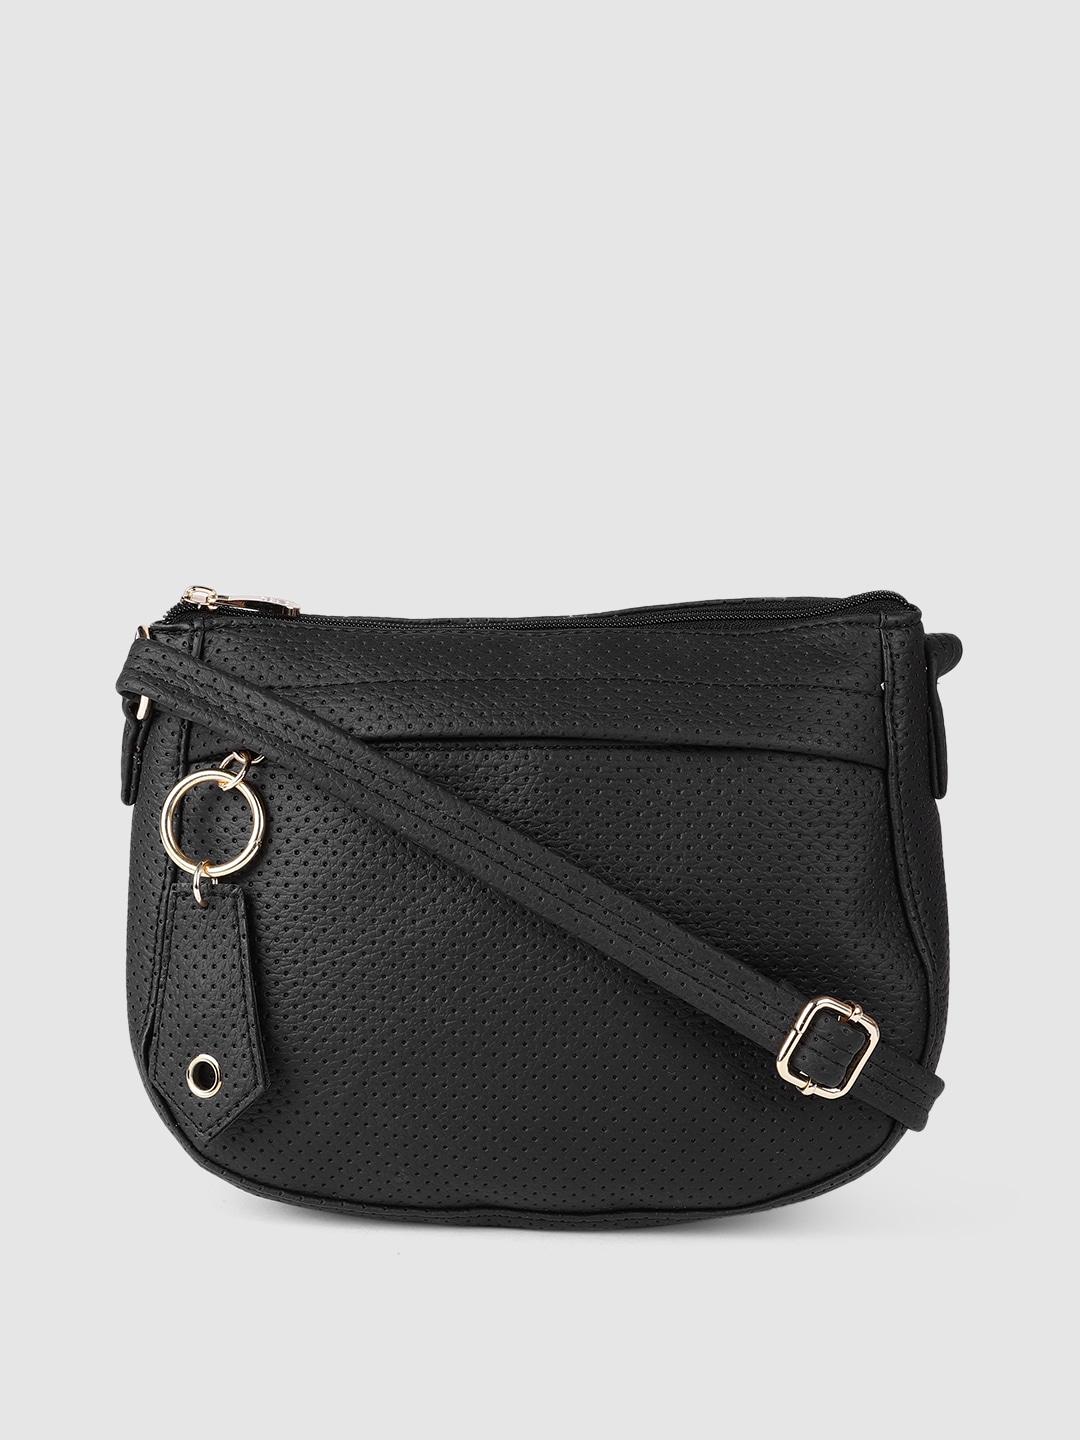 Baggit Black Textured Structured Sling Bag Price in India